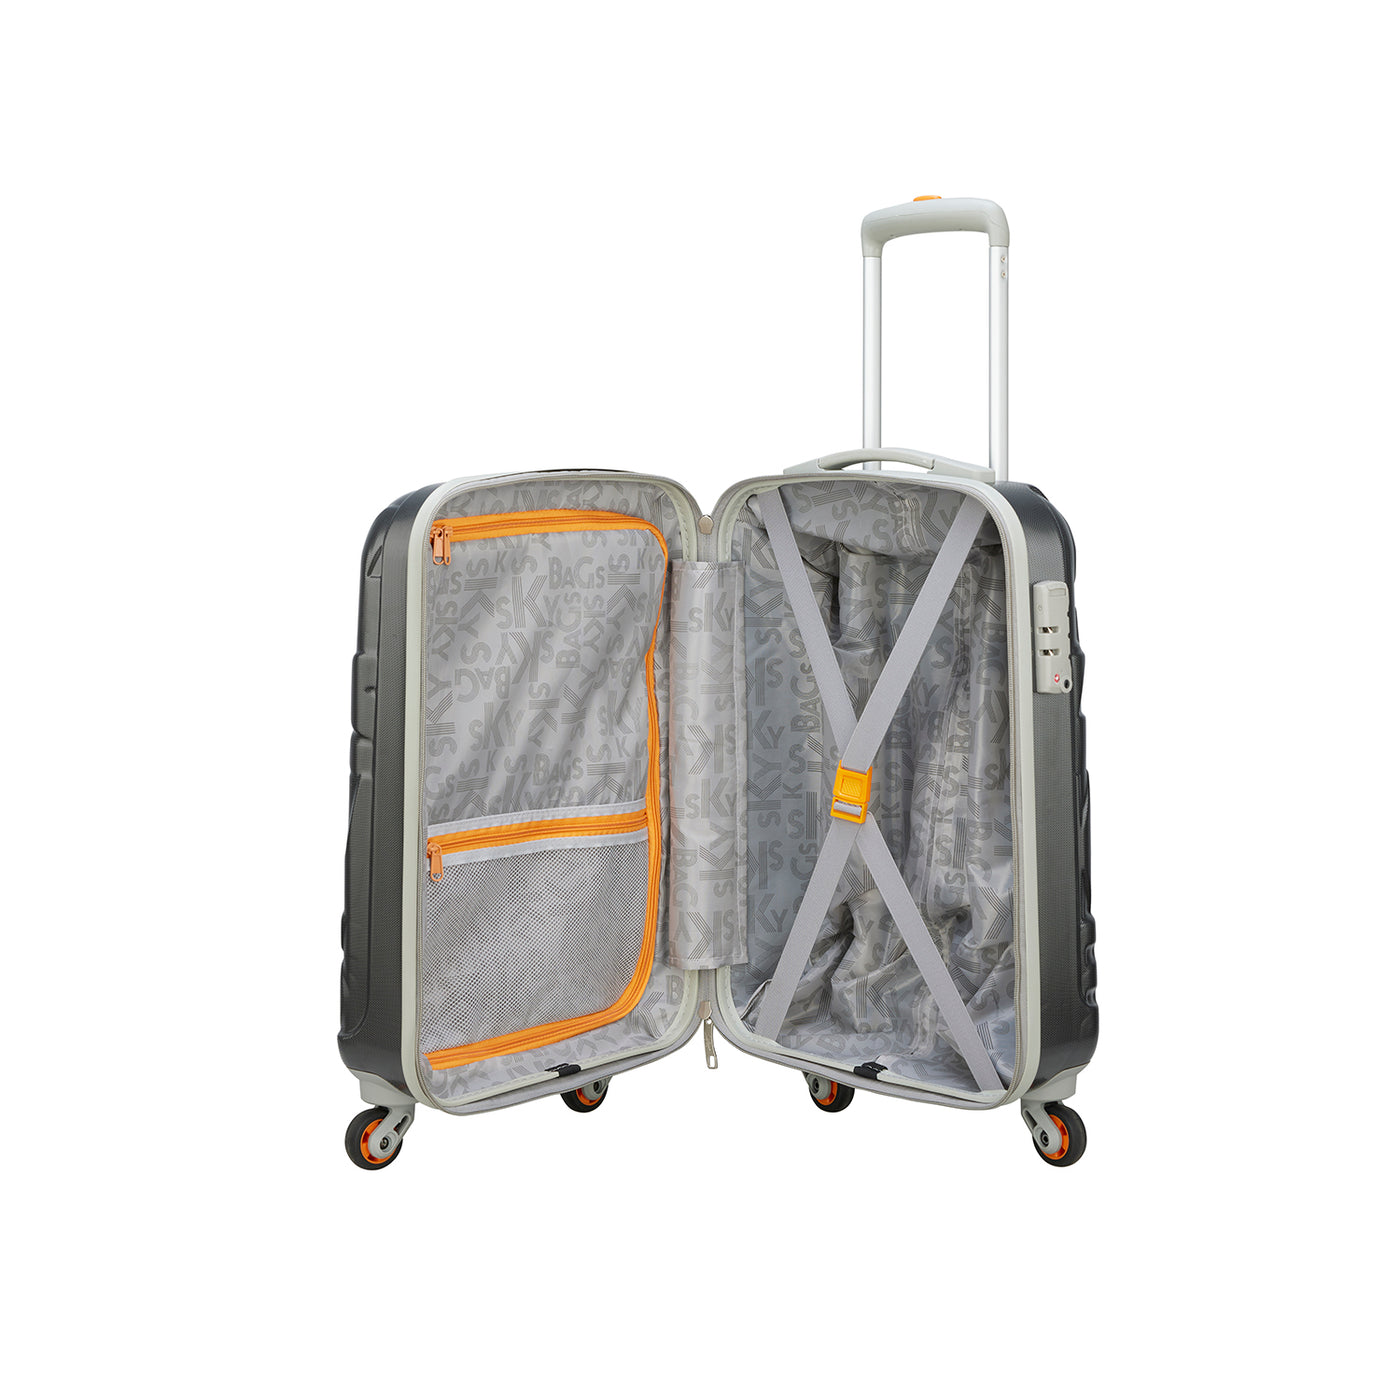 Buy Skybags Skybags Shooting Star 360 Cabin Hard Sided Trolley Suitcase -  55 cm at Redfynd